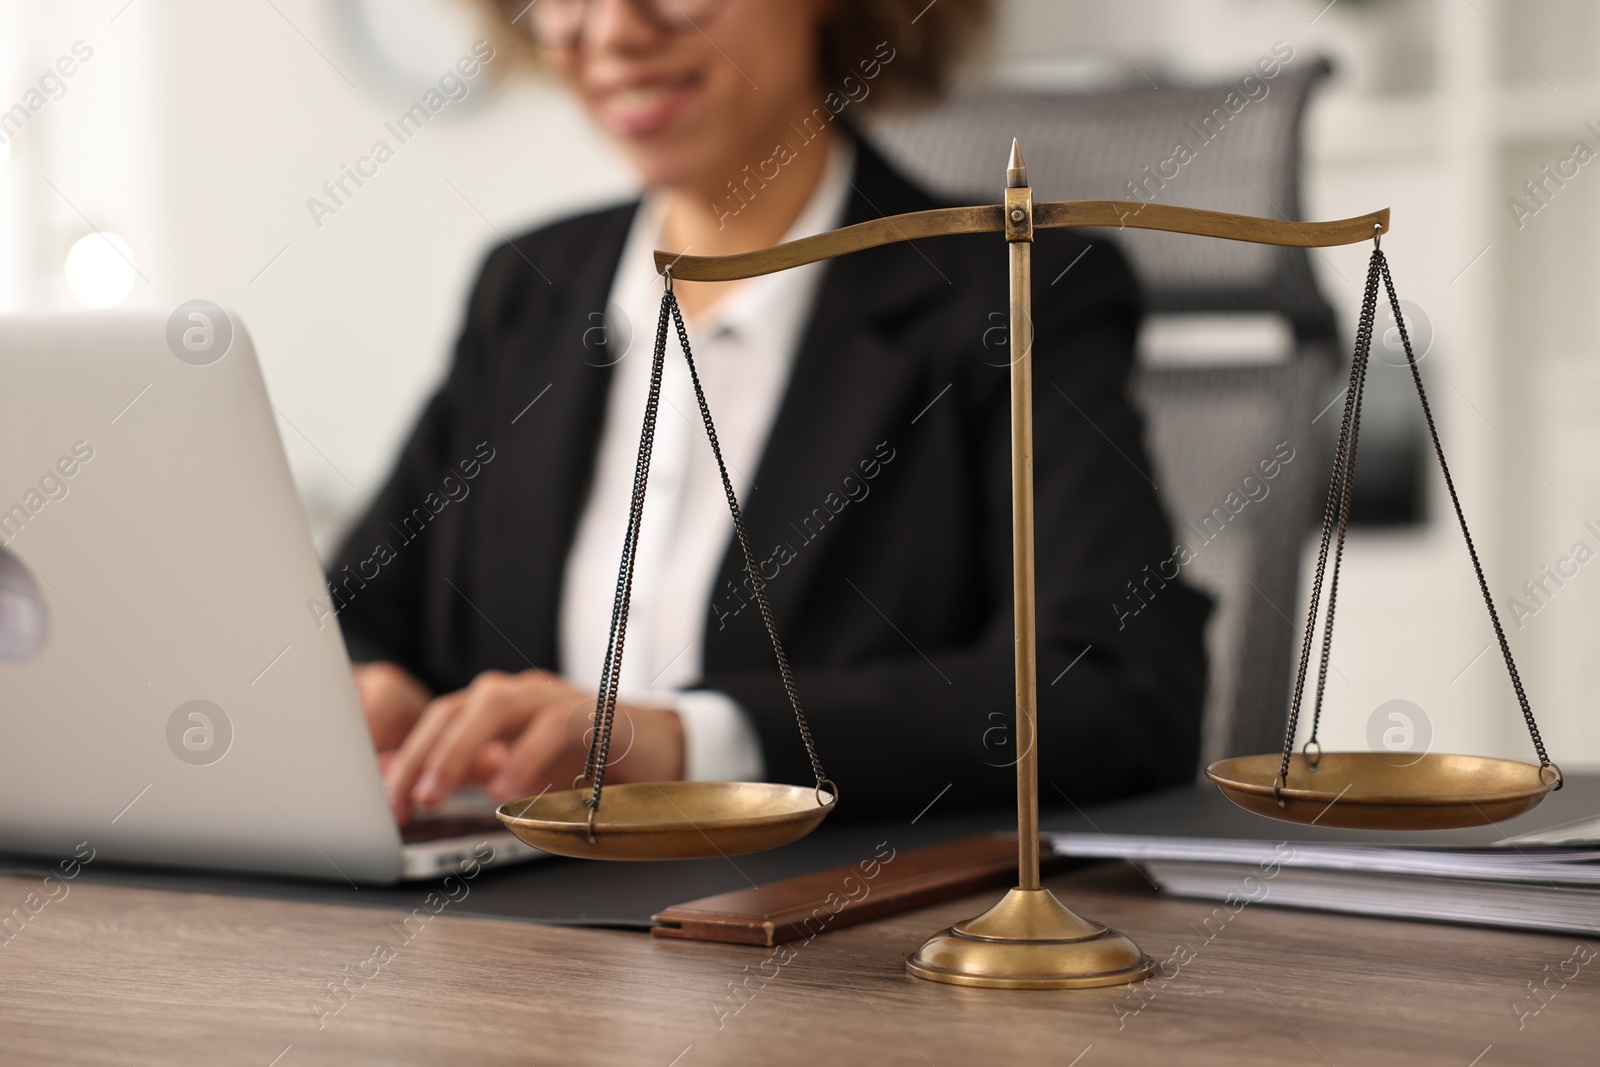 Photo of Notary using laptop at workplace in office, focus on scales of justice